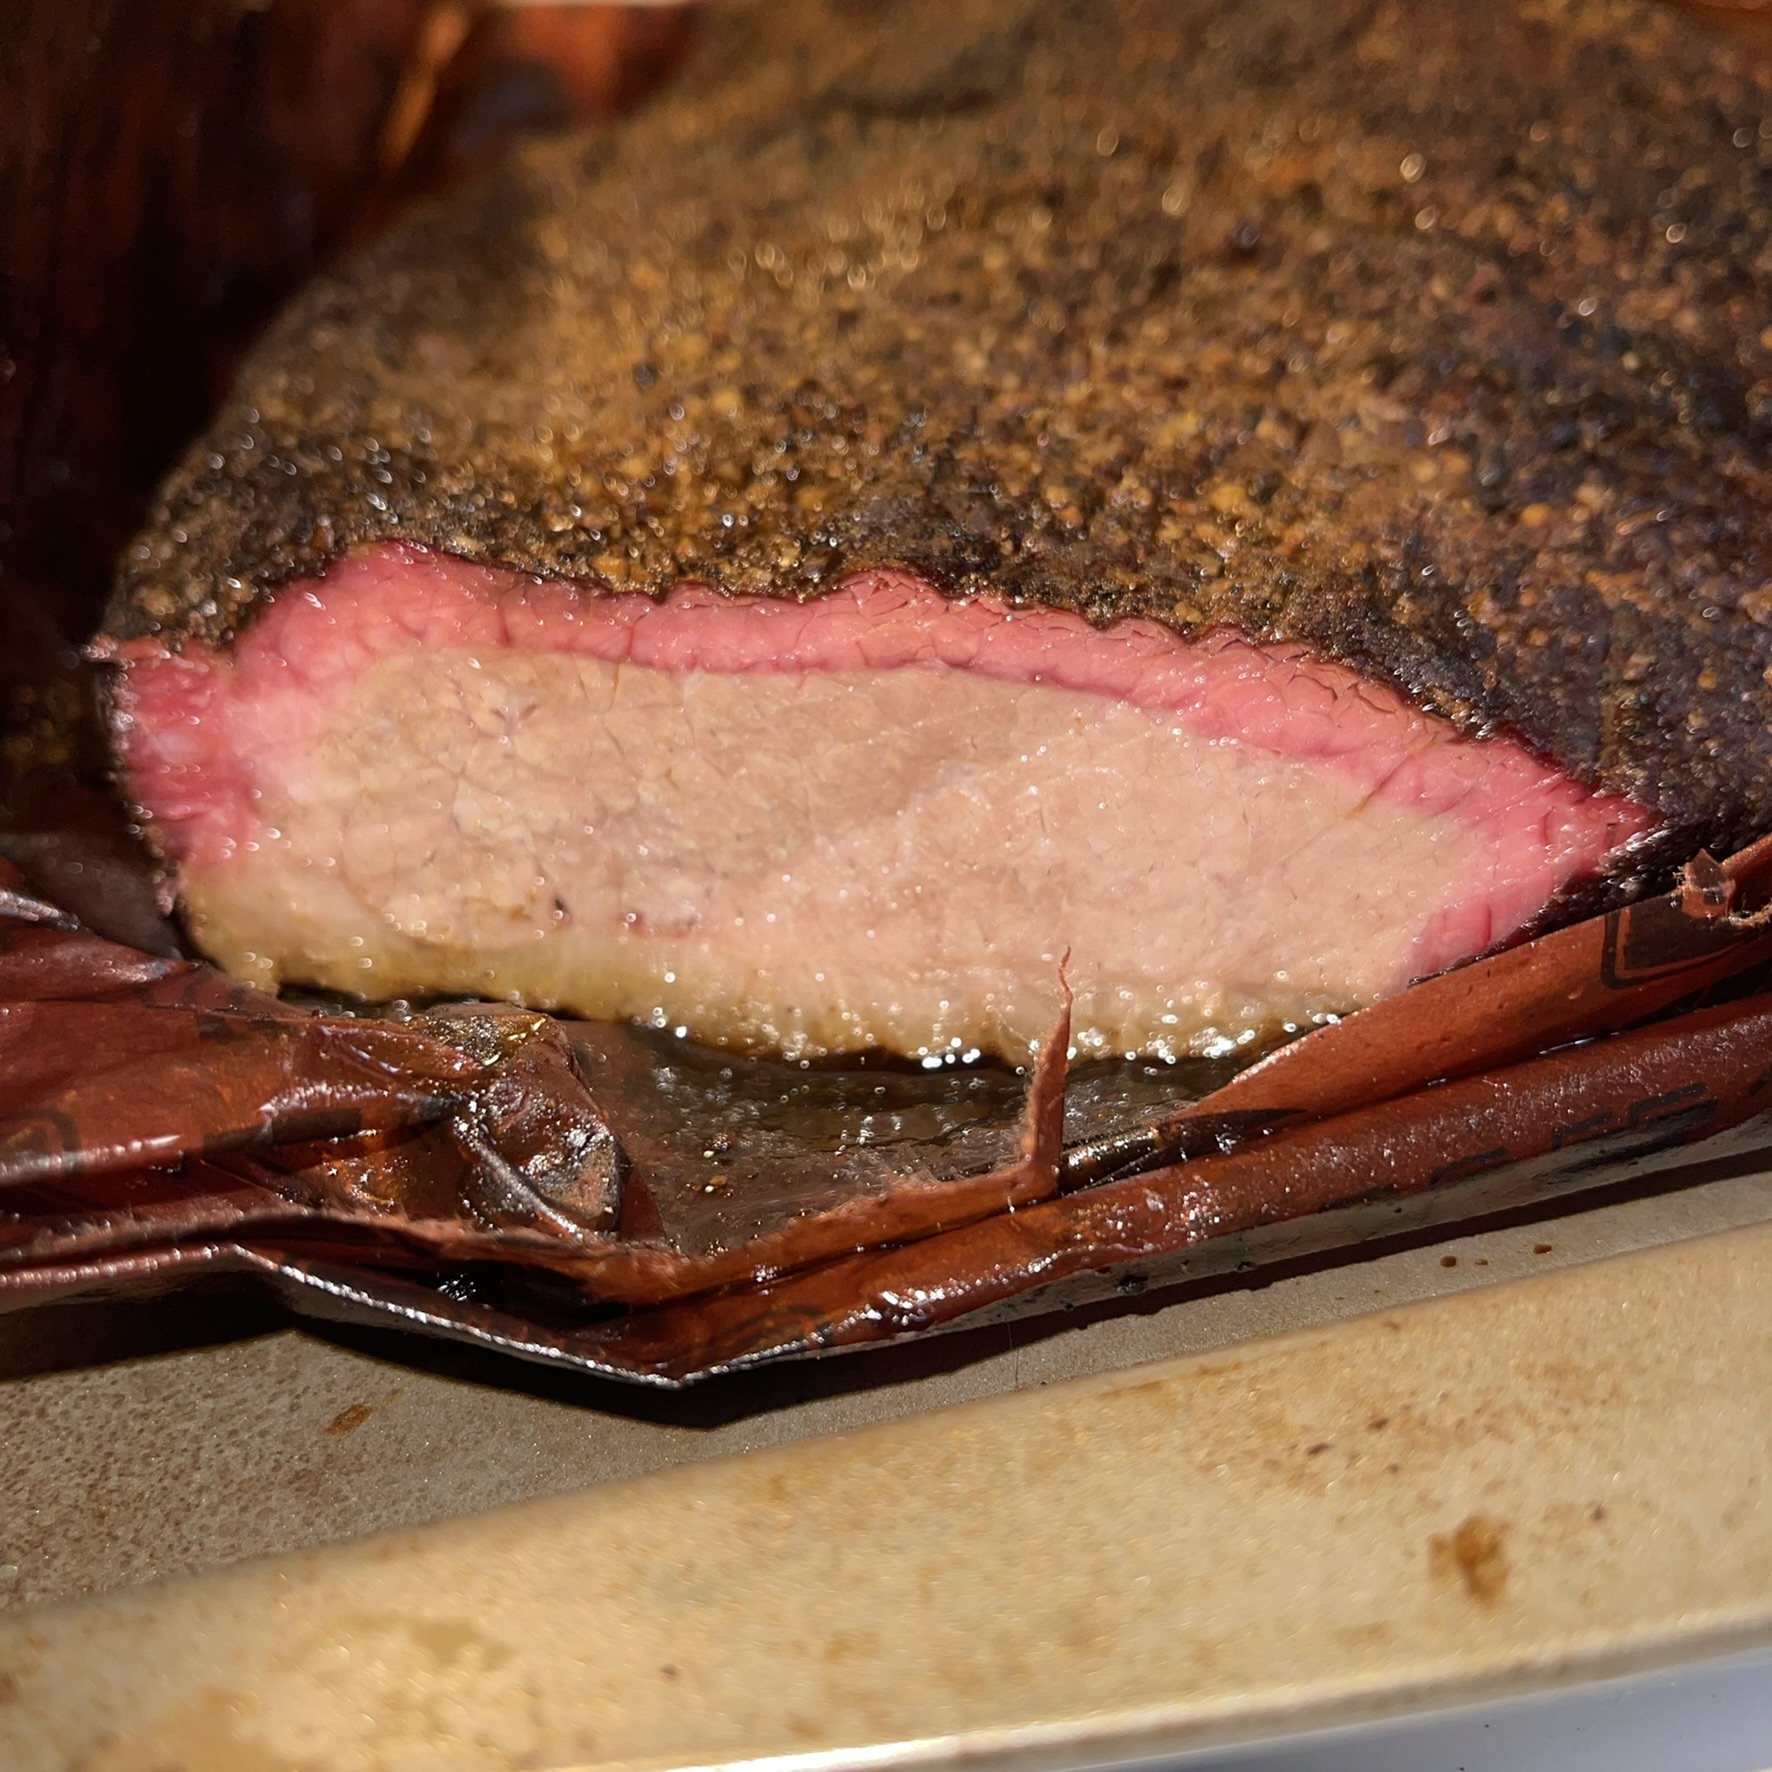 What Temp to Wrap Brisket: Wrapping Wisdom - Choosing the Right Temperature to Wrap Brisket